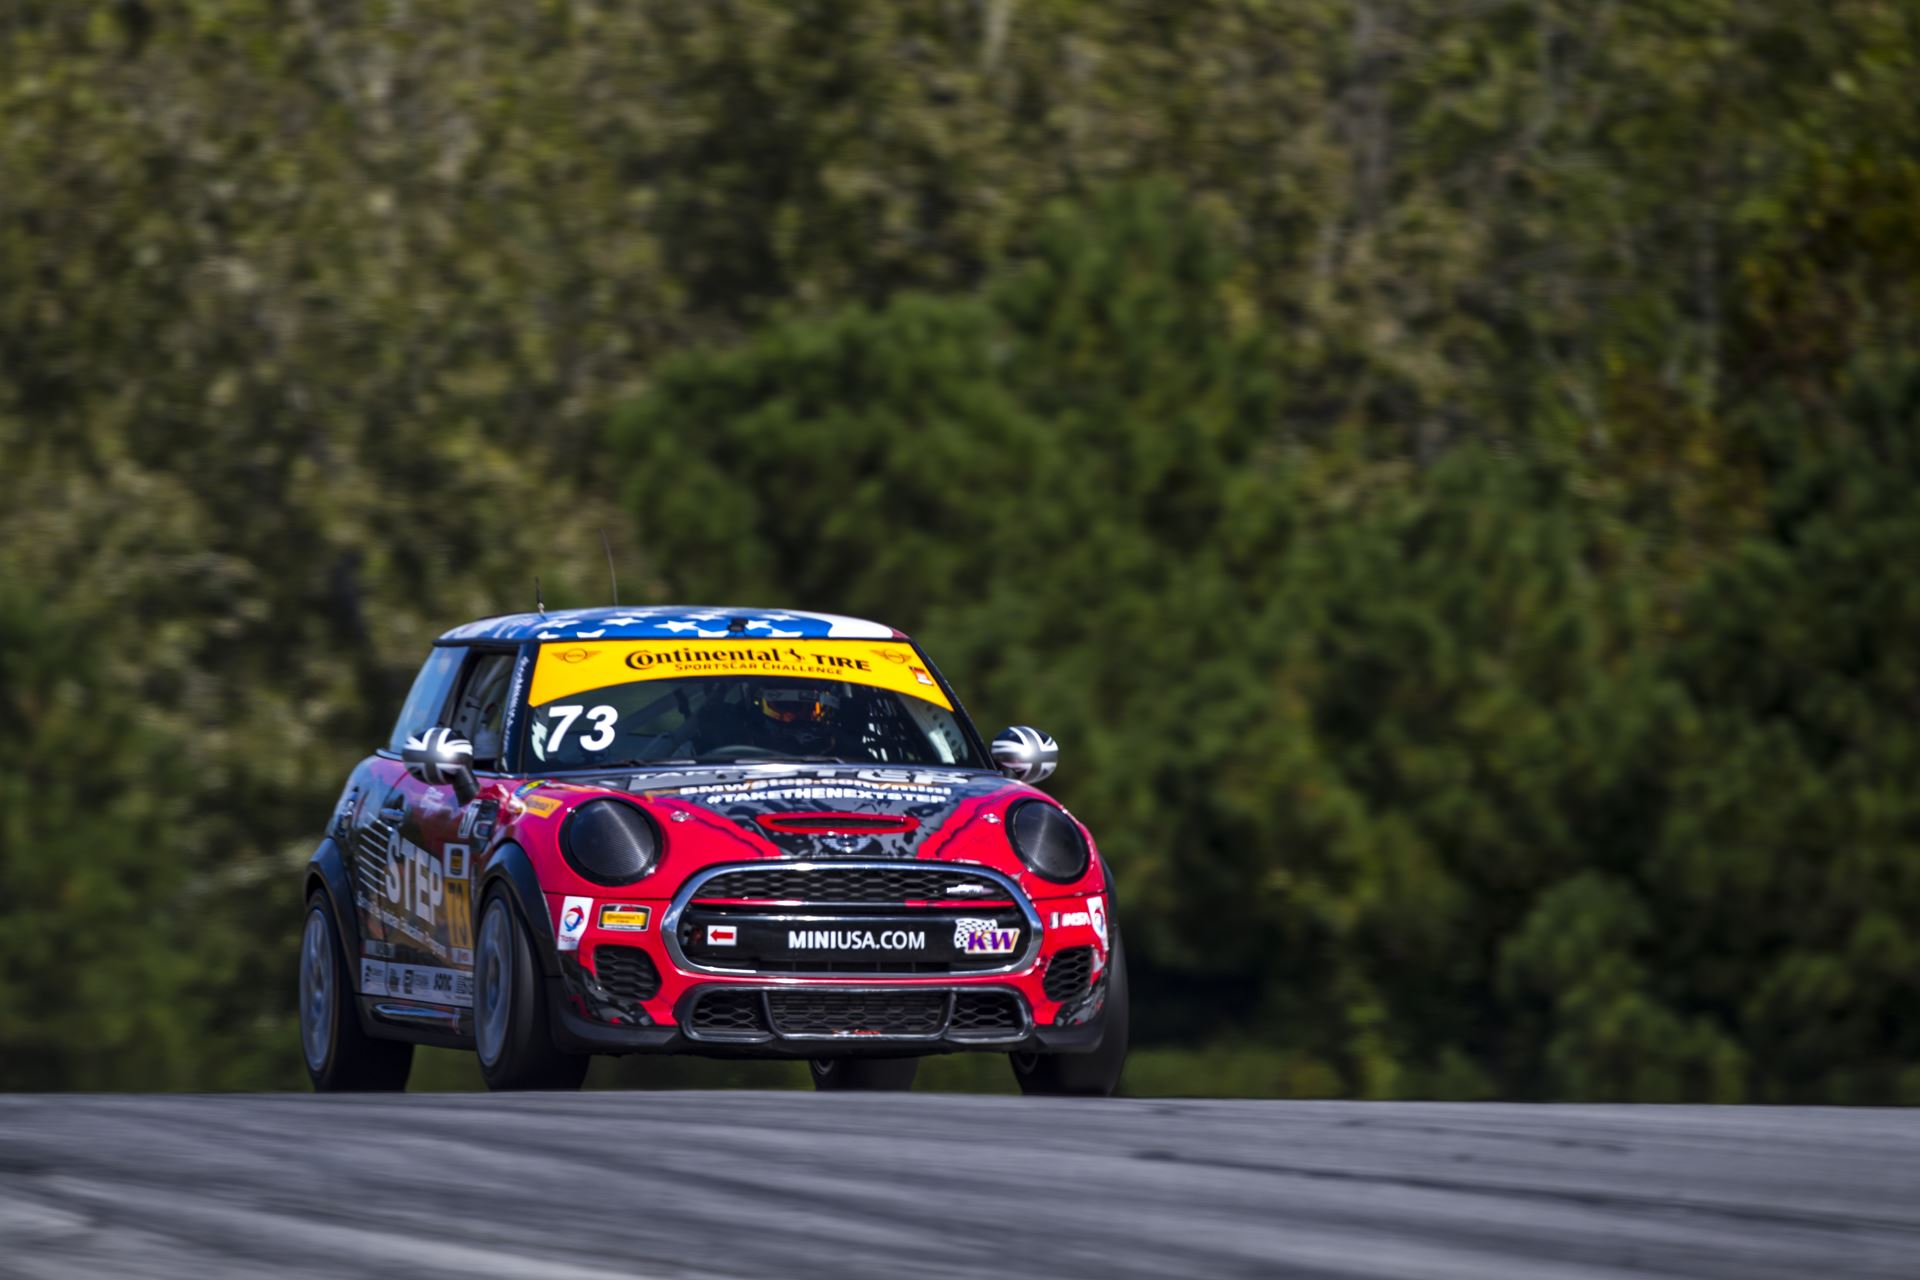 MINI JCW Team Closes Out Second Full Season In The Street Tuner Class Of The Continental Tire Sportscar Challenge Series